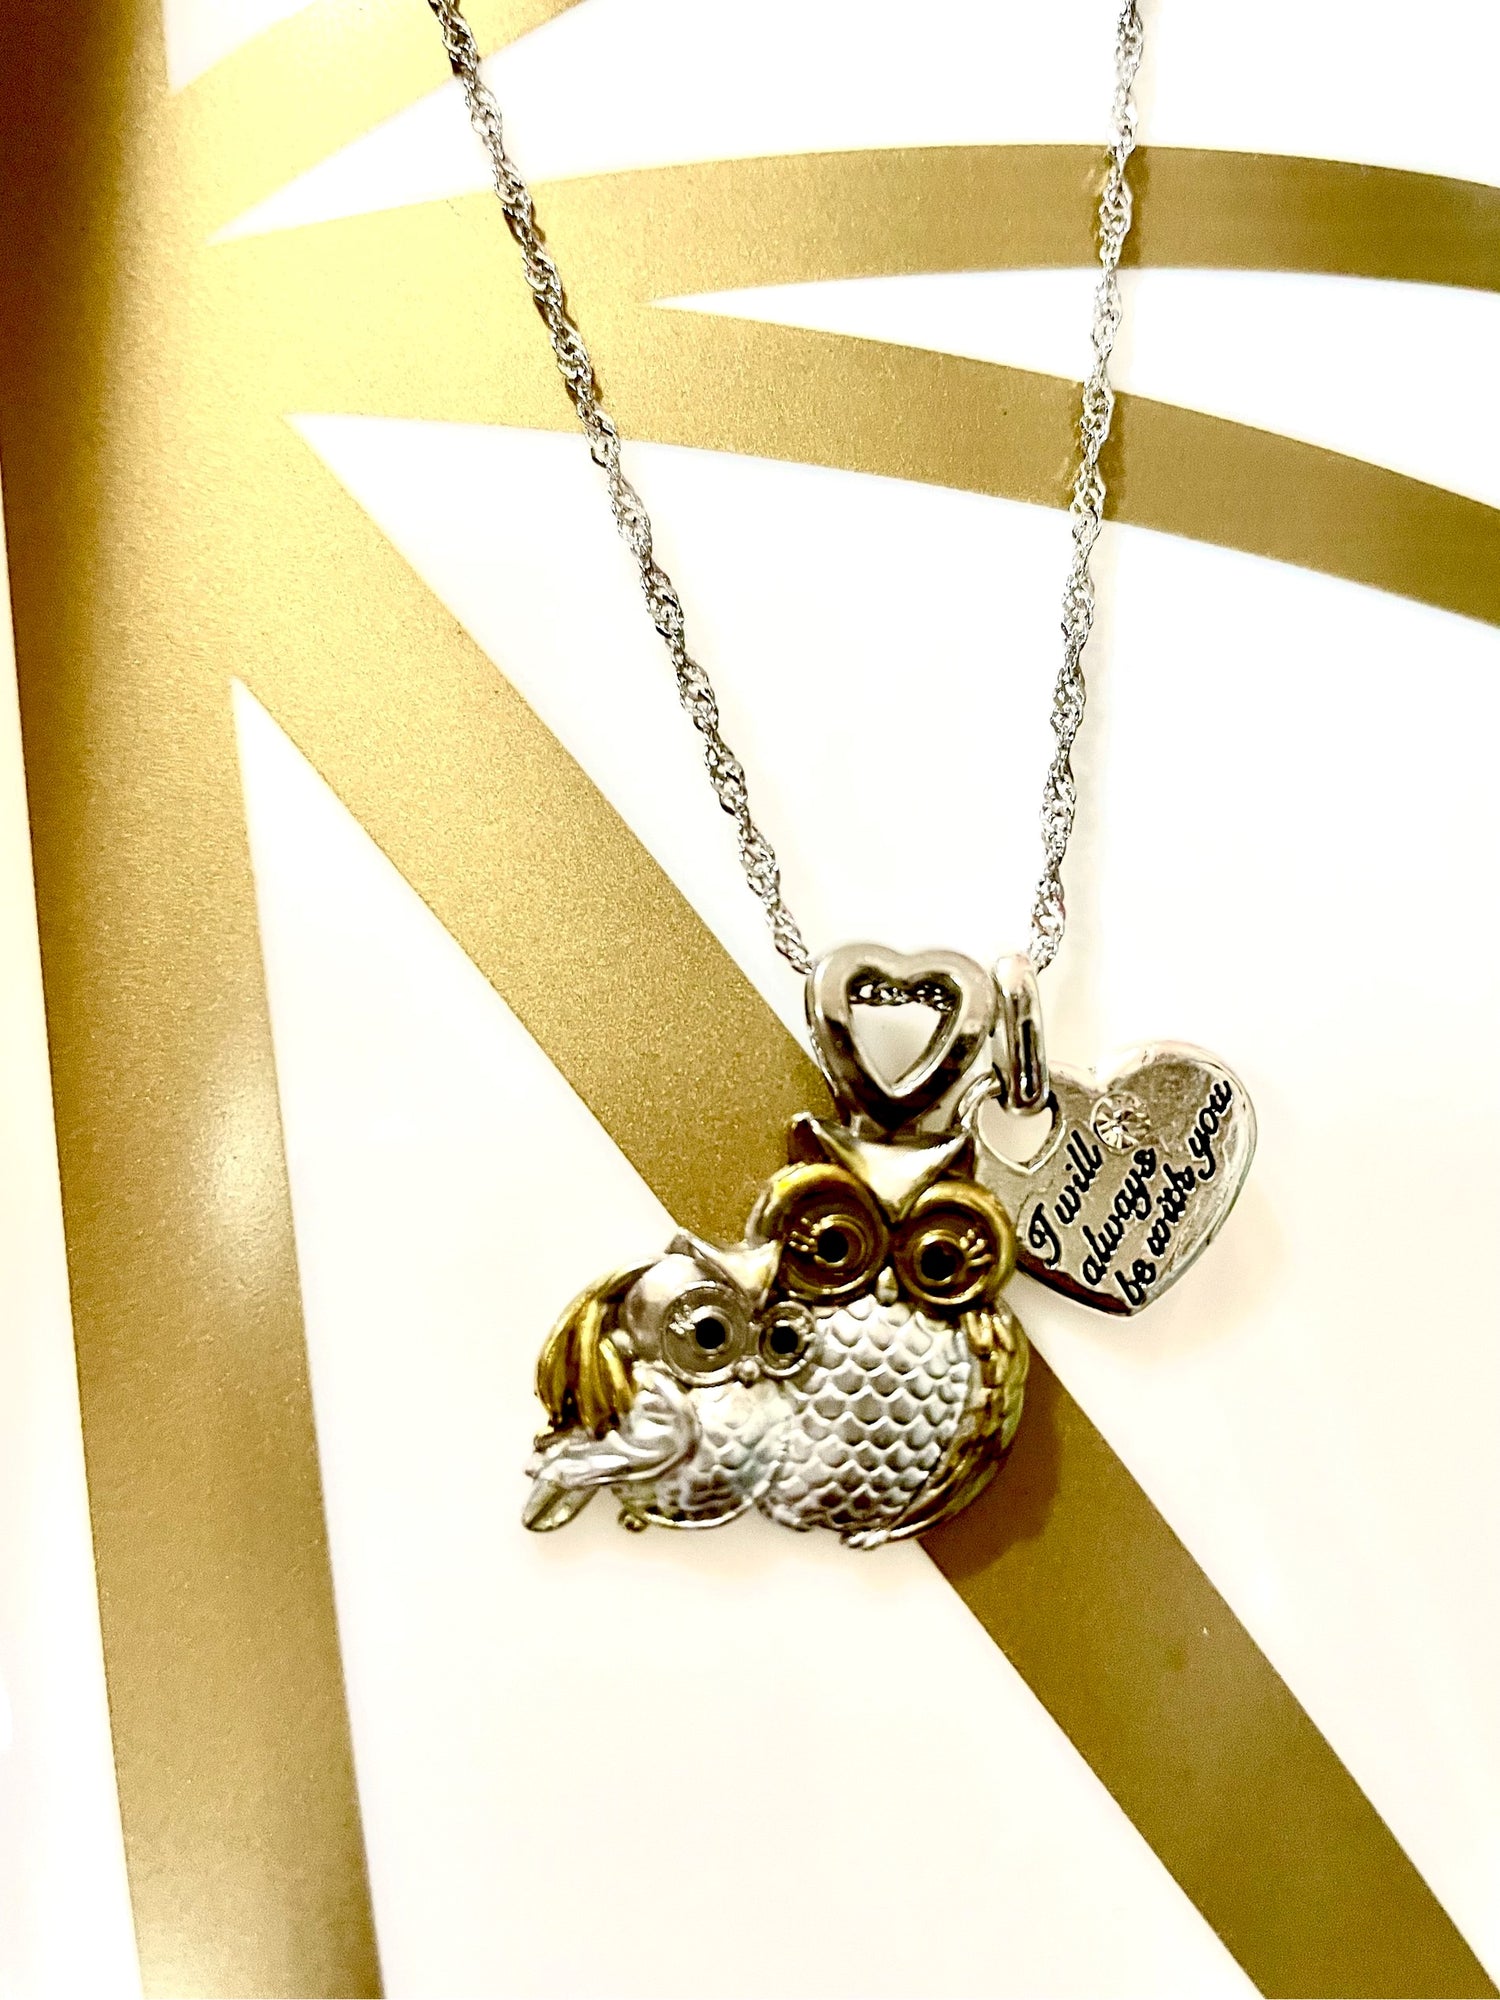 Owl charm necklace pendant love family gift 2 tone jewelry